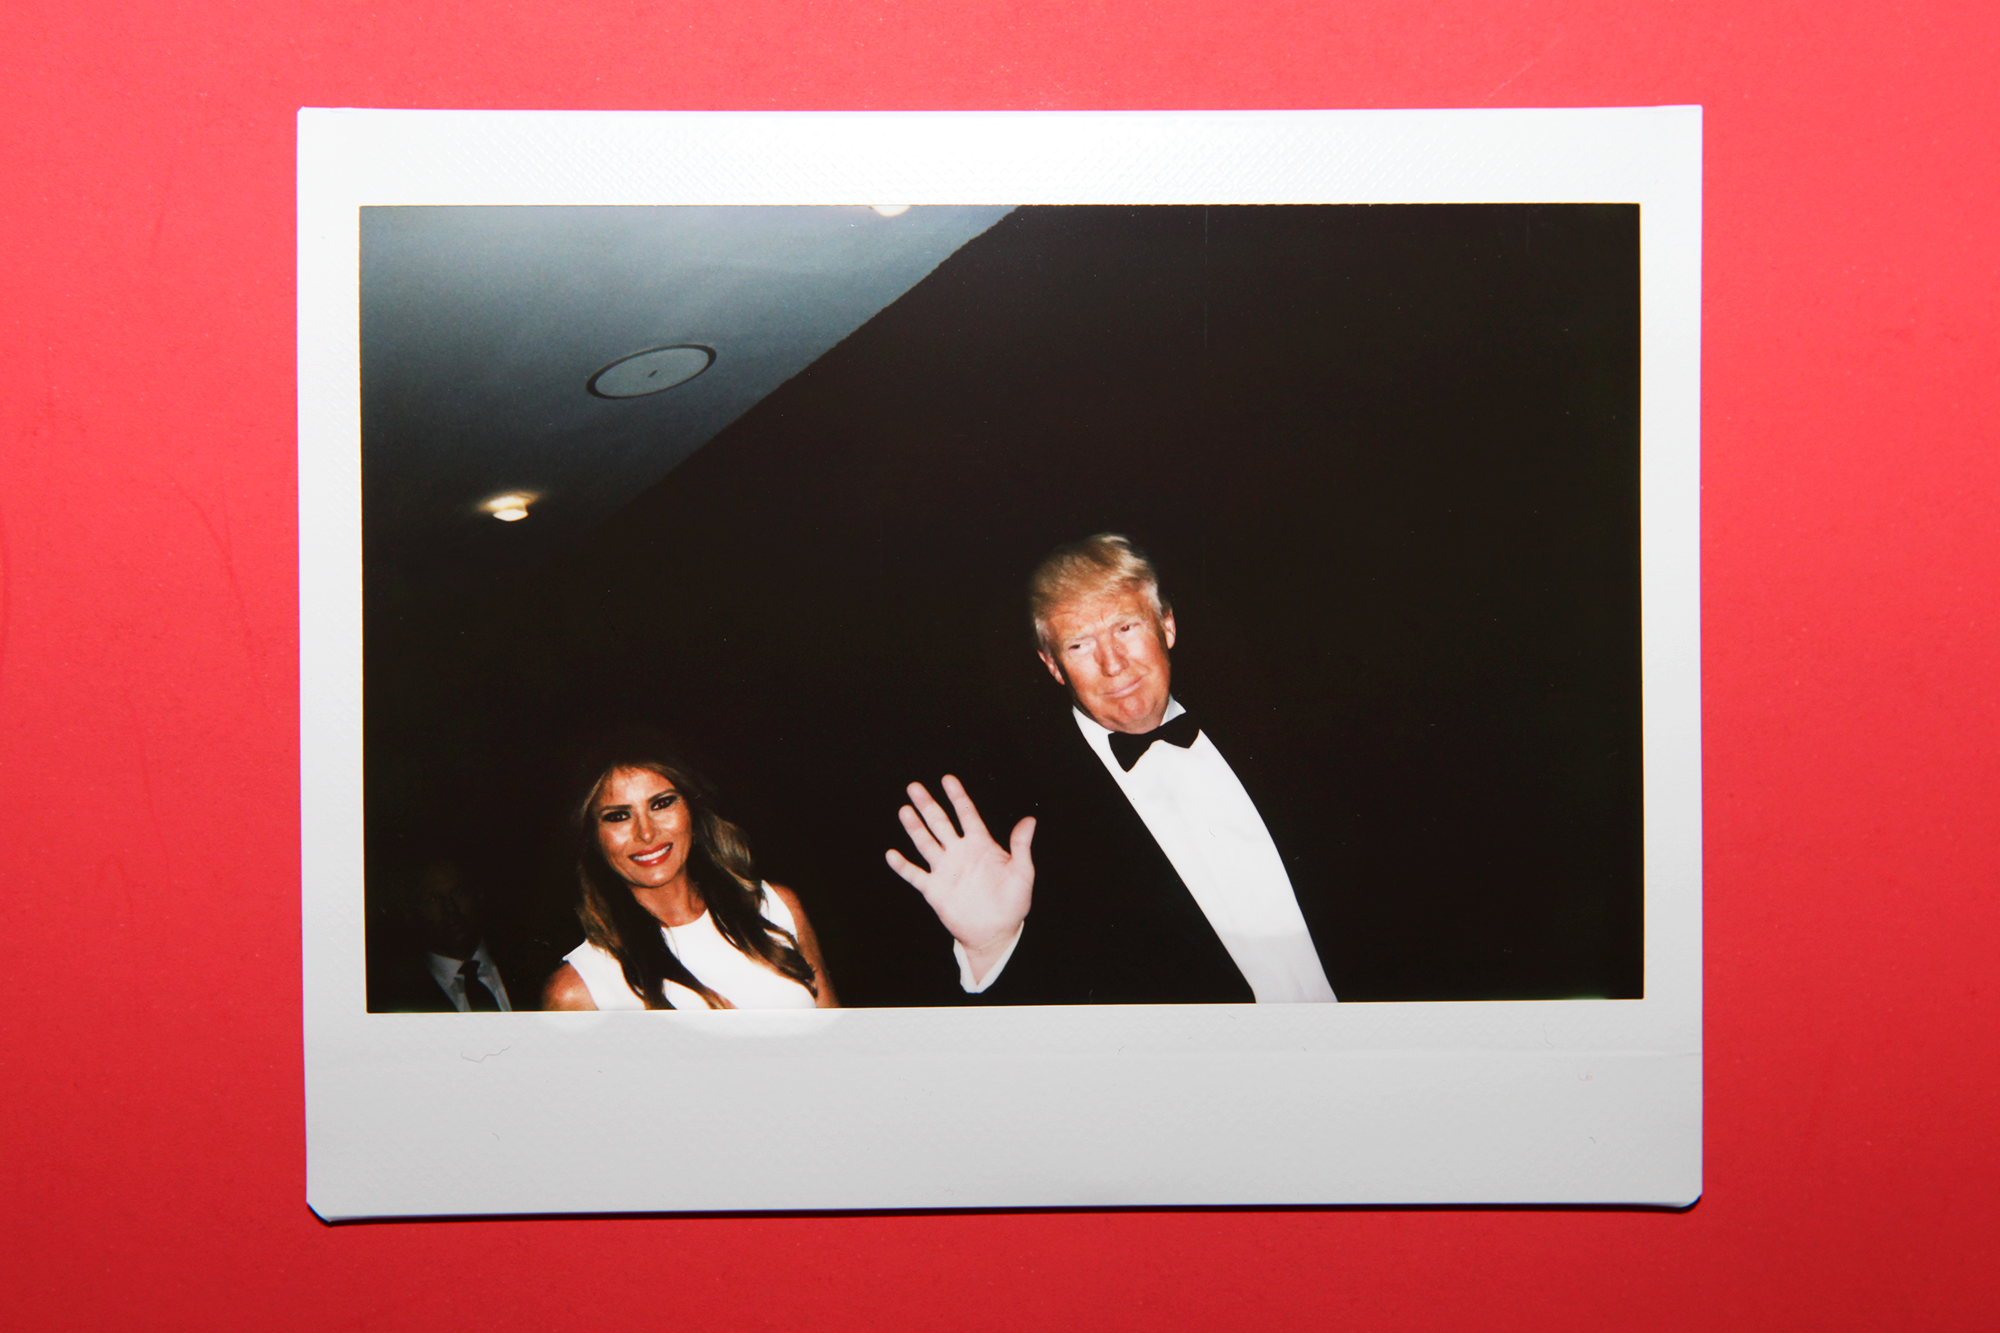 Melania Trump and Donald Trump at the TIME 100 Gala at the Time Warner Center on April 26, 2016 in New York City.